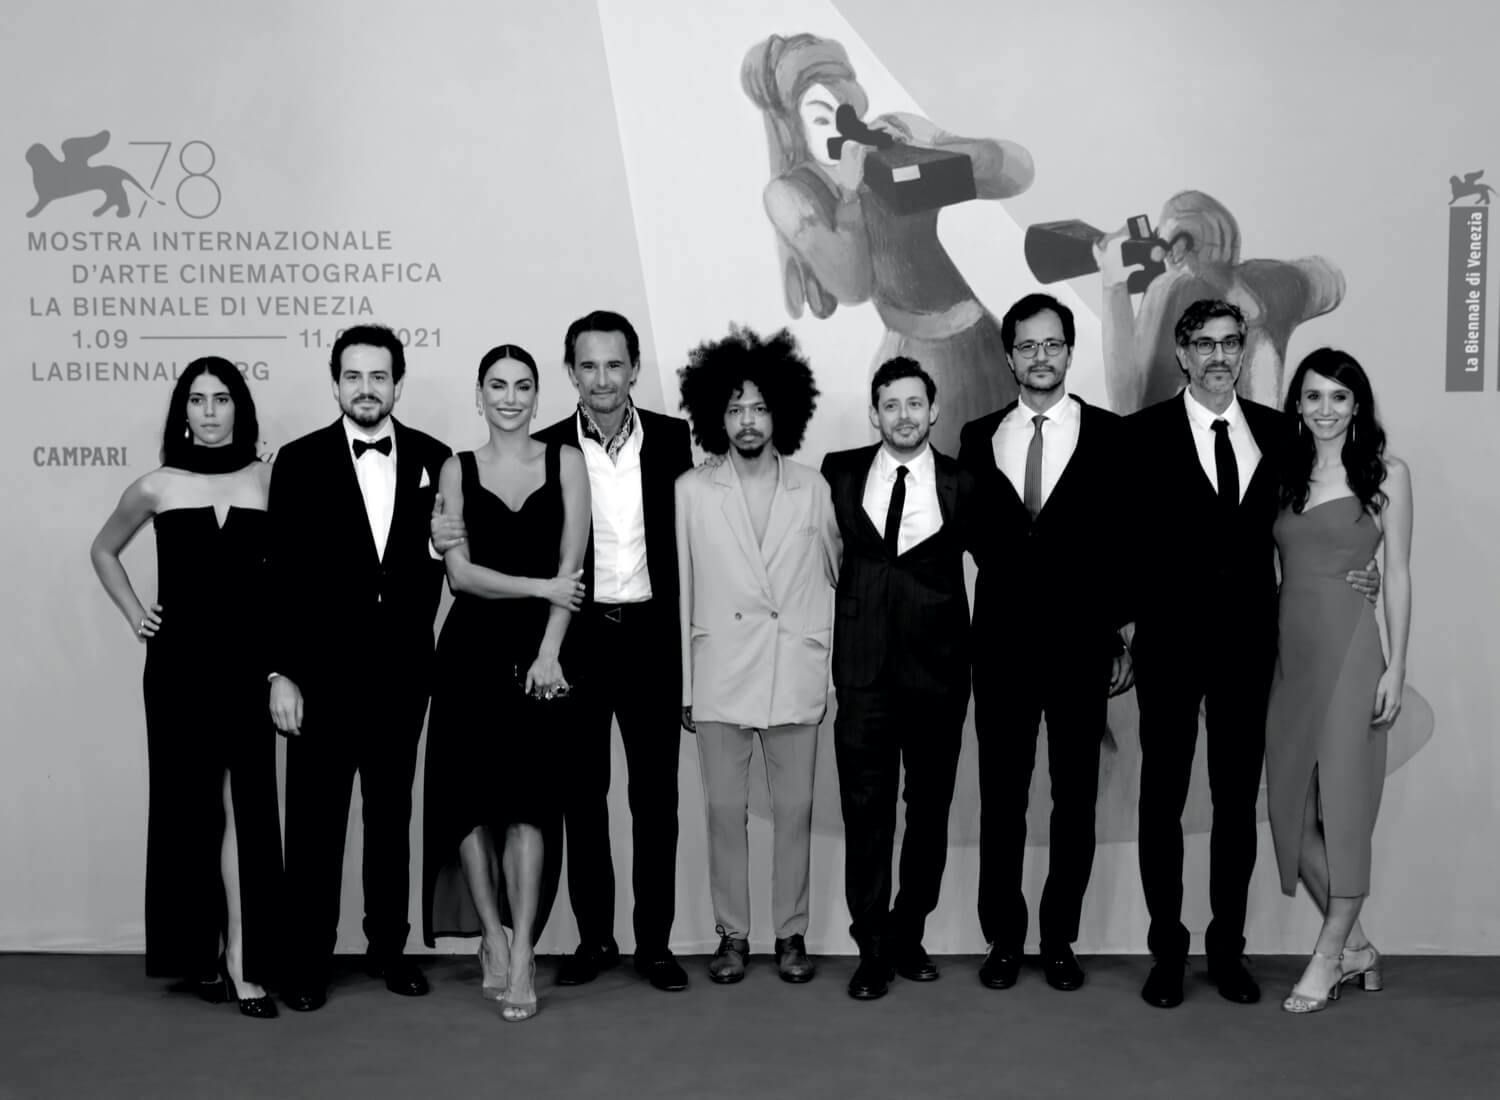 The cast of 7 Prisoners at the film’s premiere at the Venice Film Festival, 2021.